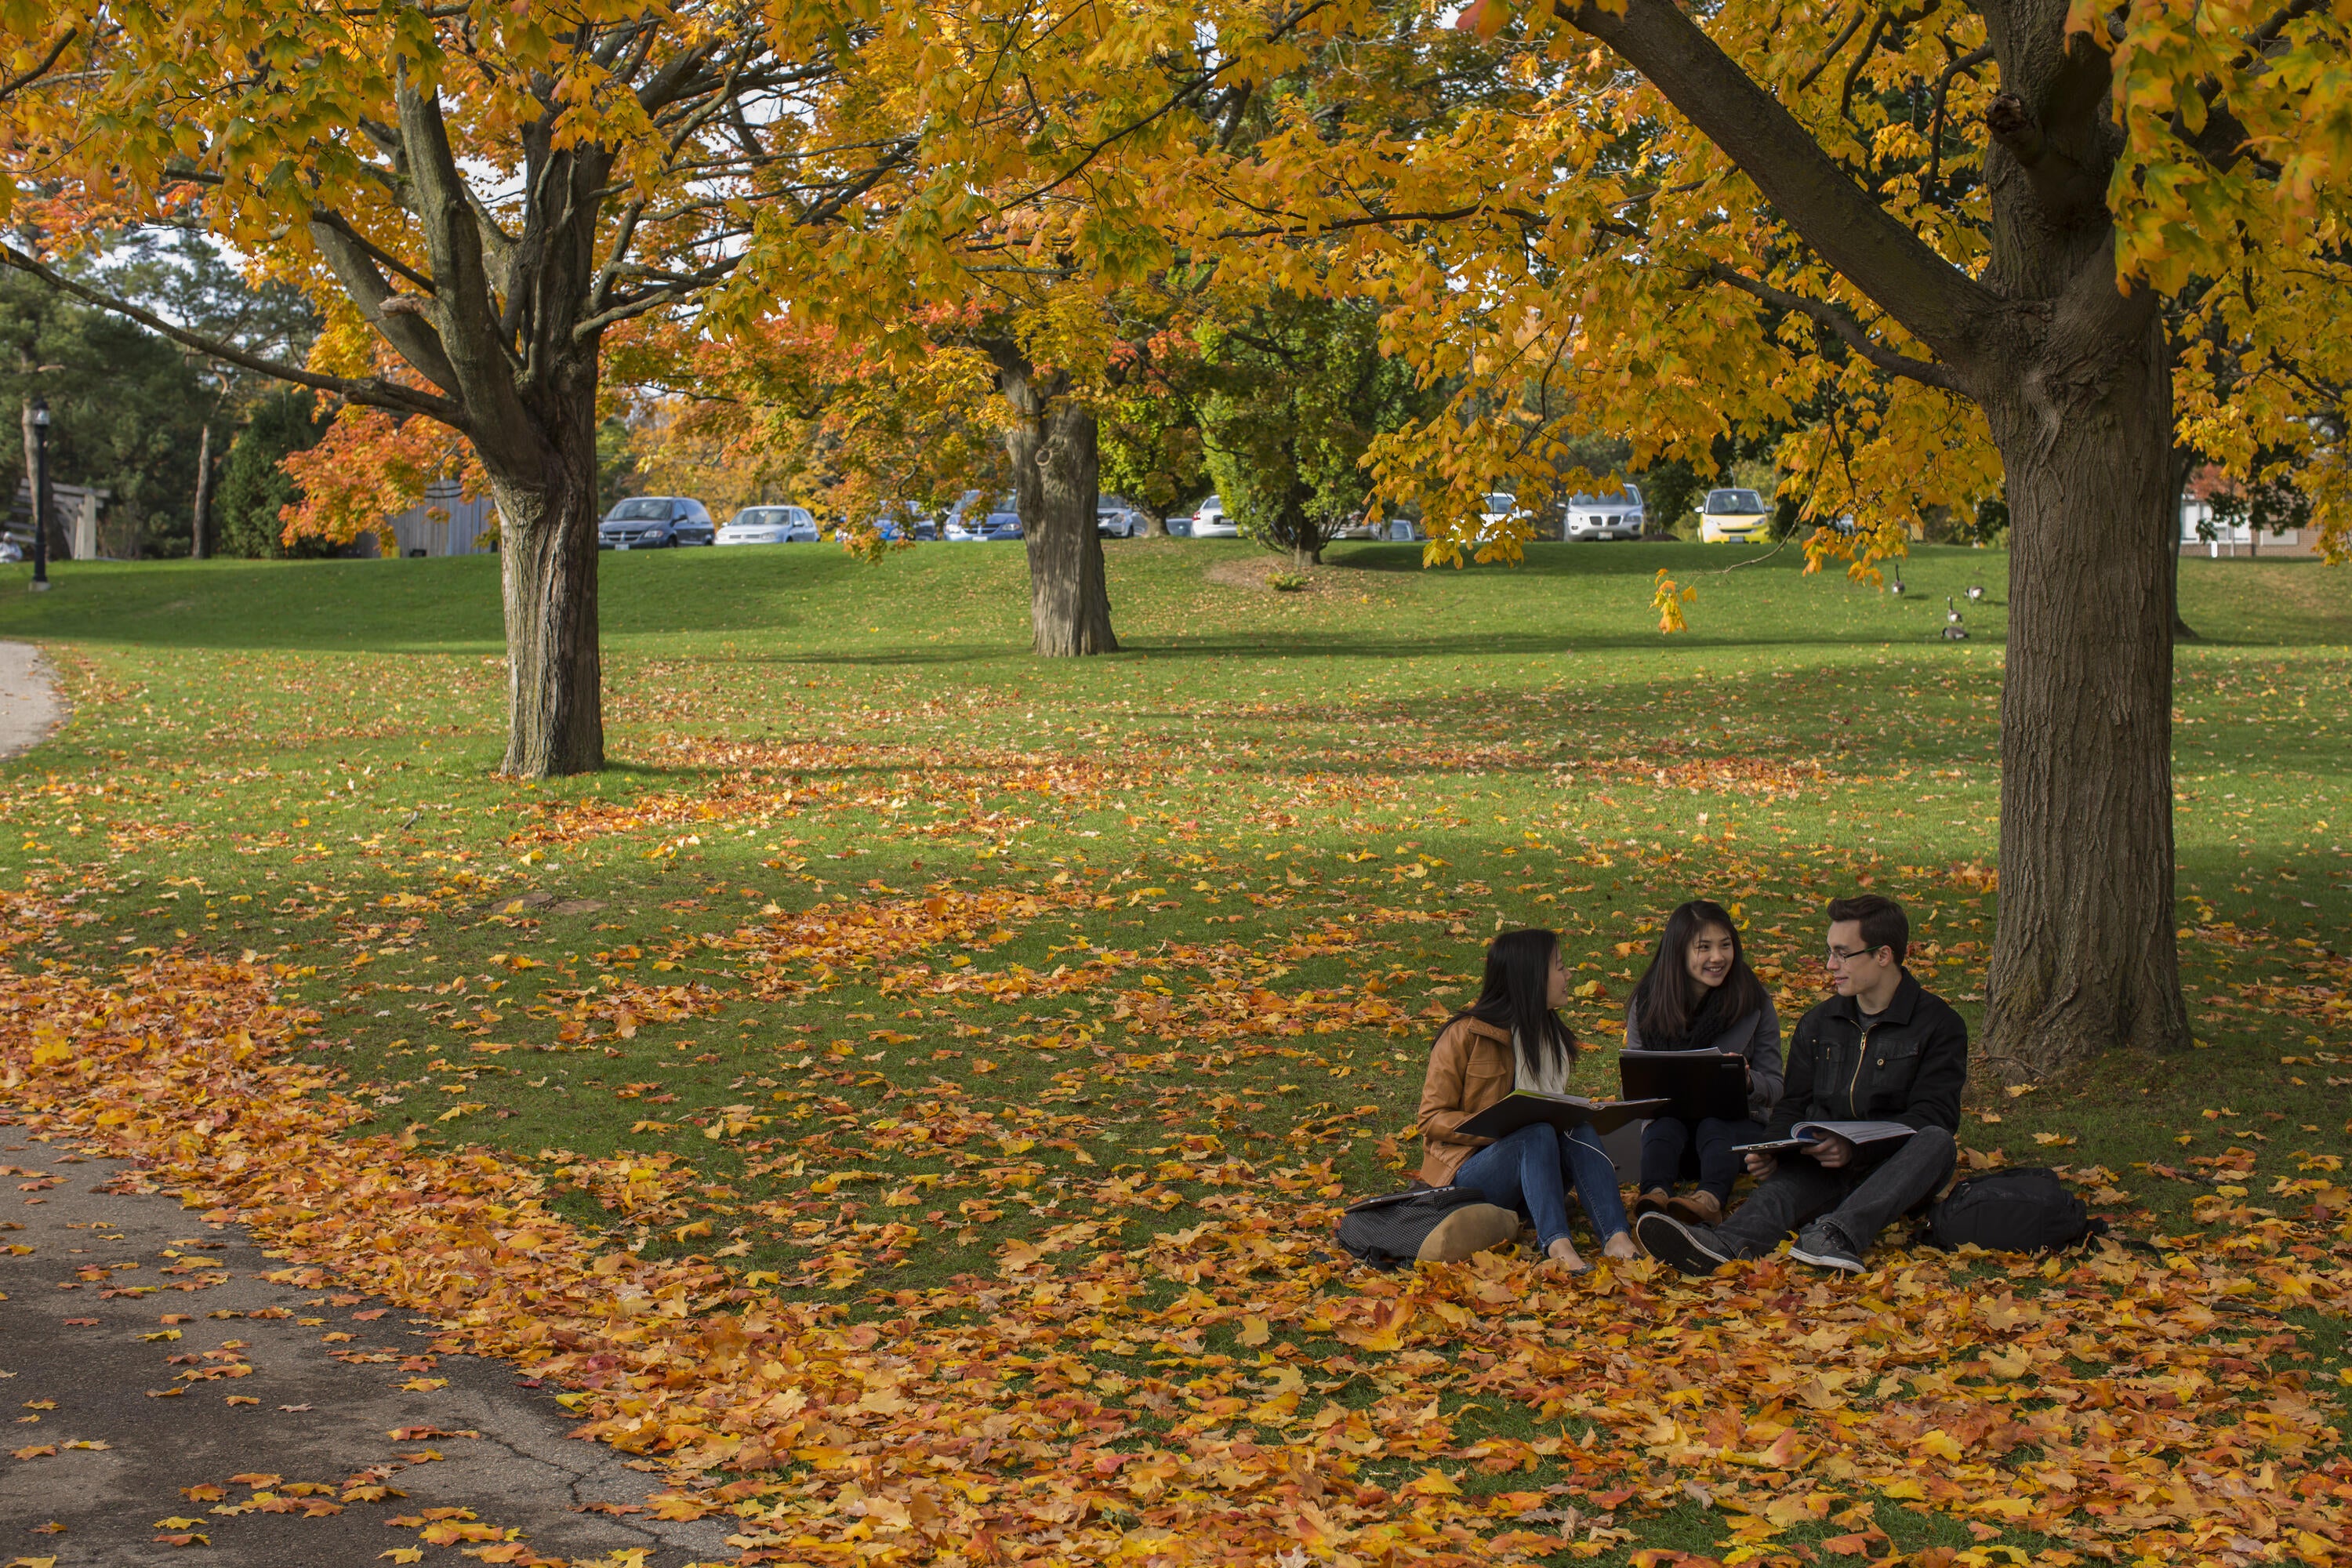 Fall leaves on the ground with three students sitting together